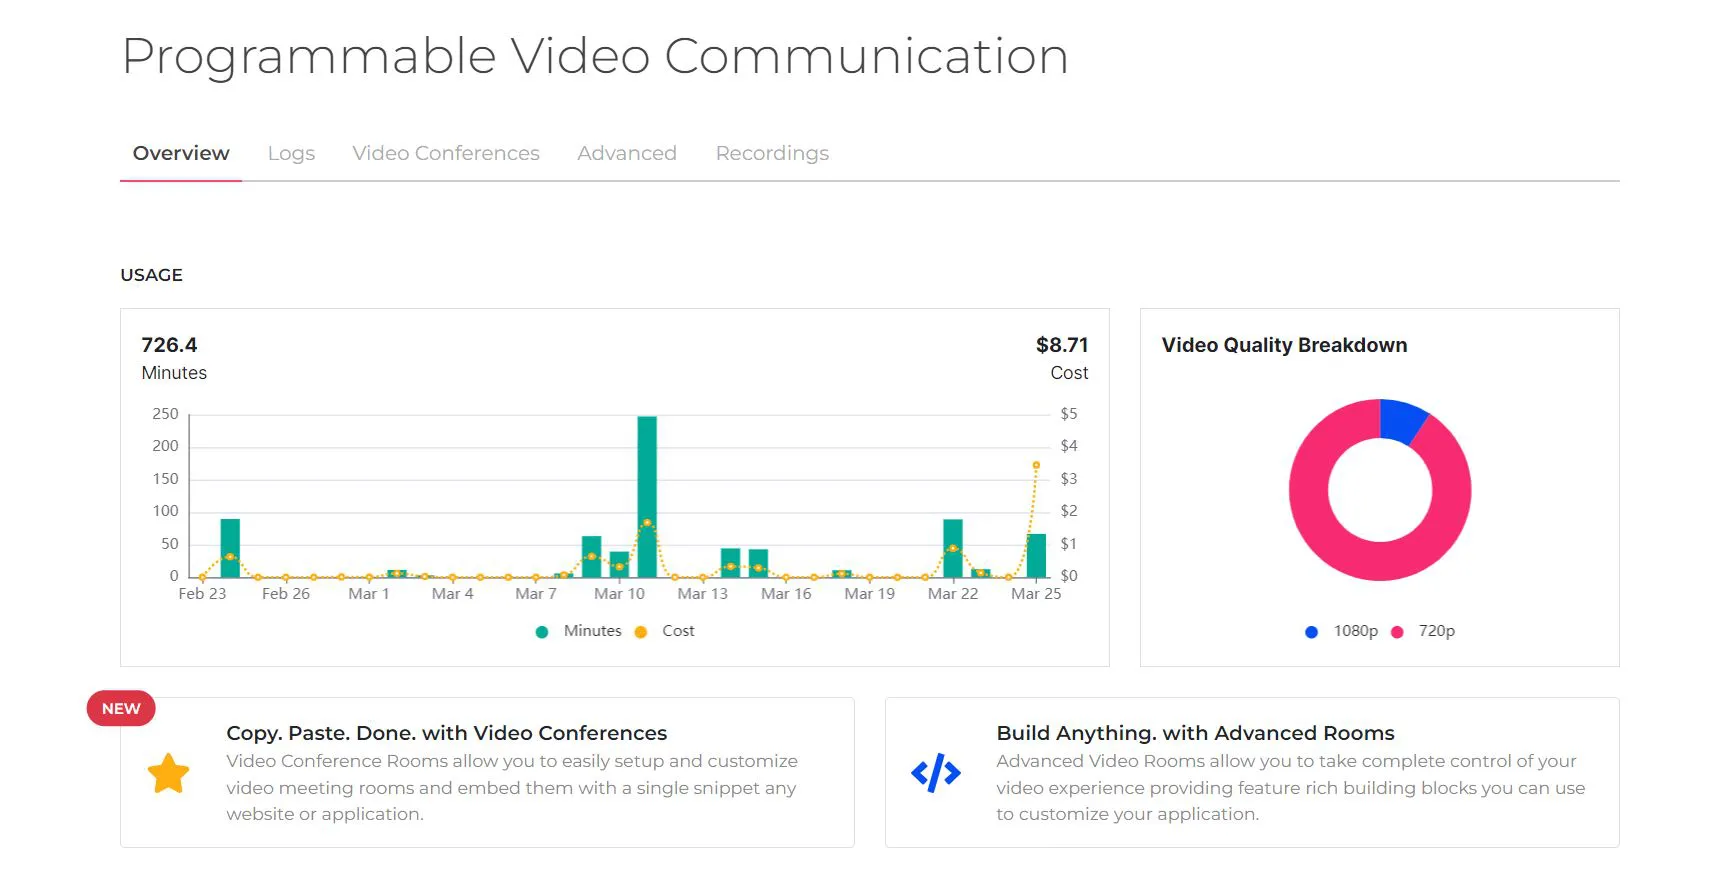 A screenshot of the Programmable Video Communication page. At the top, there are tabs labeled Overview, Logs, Video Conferences, Advanced, and Recordings. In Overview, the selected tab, there is a bar graph showing a month of usage by minues and cost. There is also a pie chart breaking down video quality into slices representing 1080p and 720p quality.